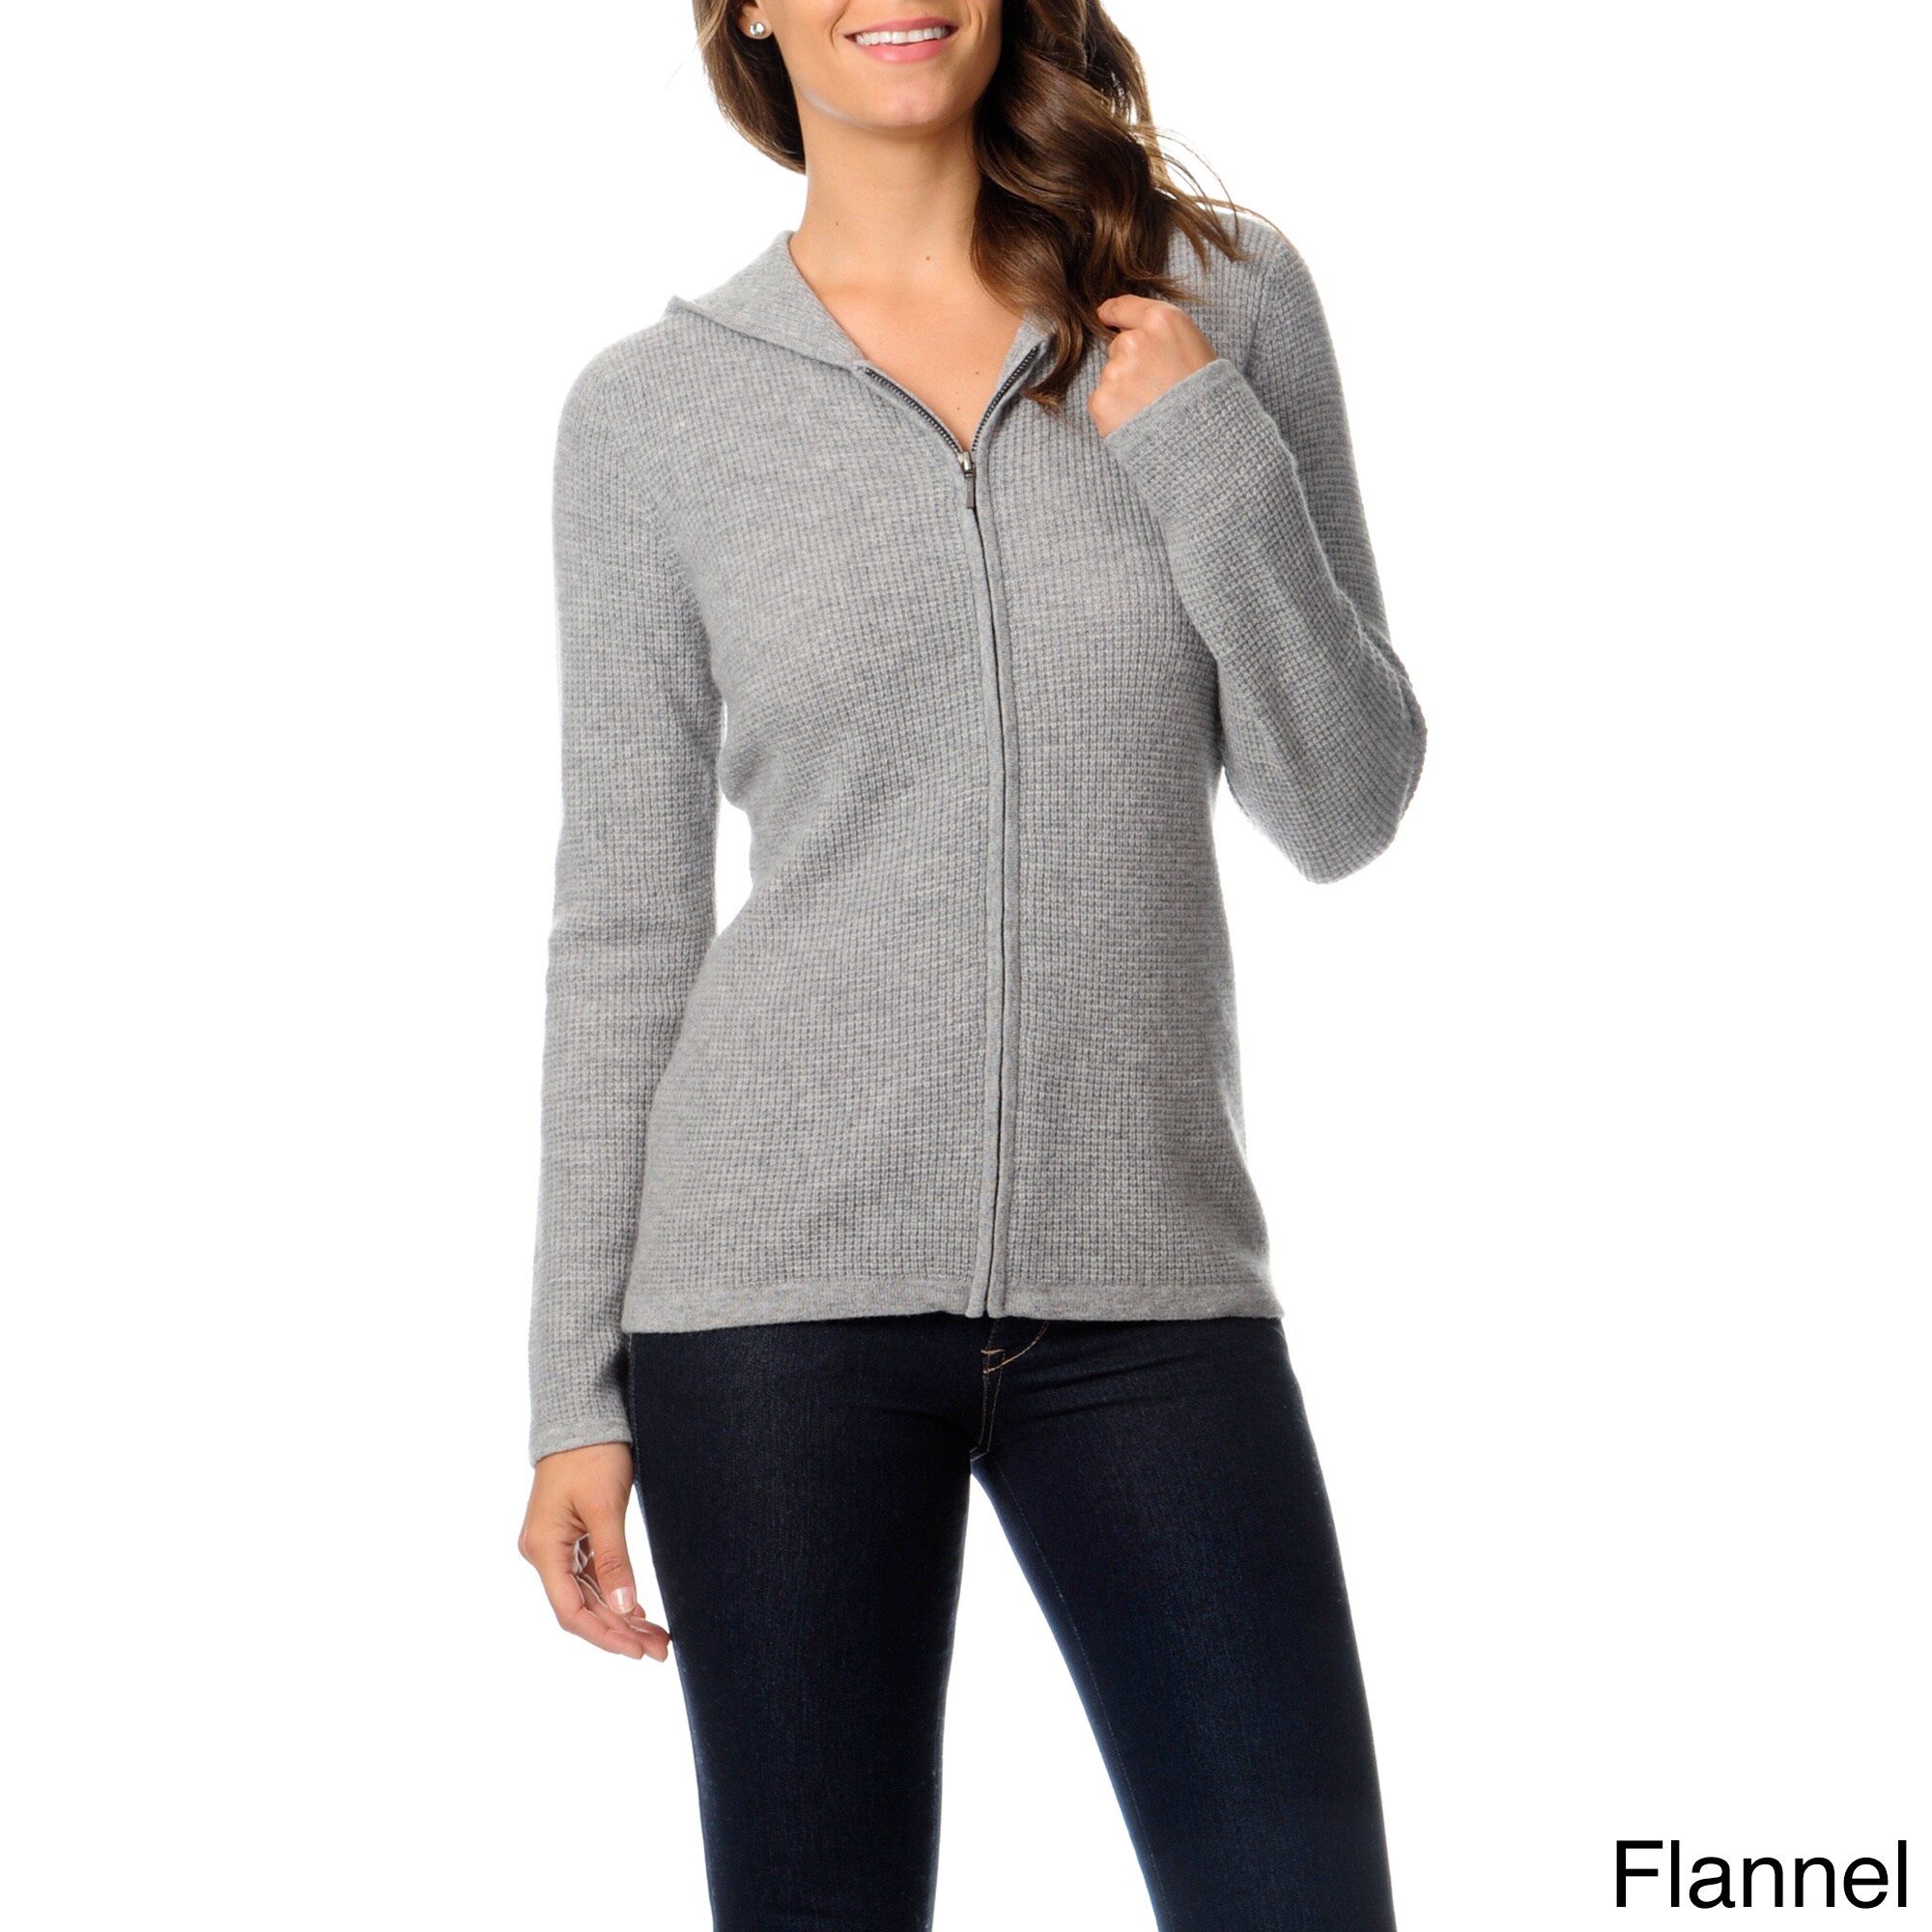 Ply Cashmere Women's Cashmere Zip-front Hoodie - Overstock - 8335336